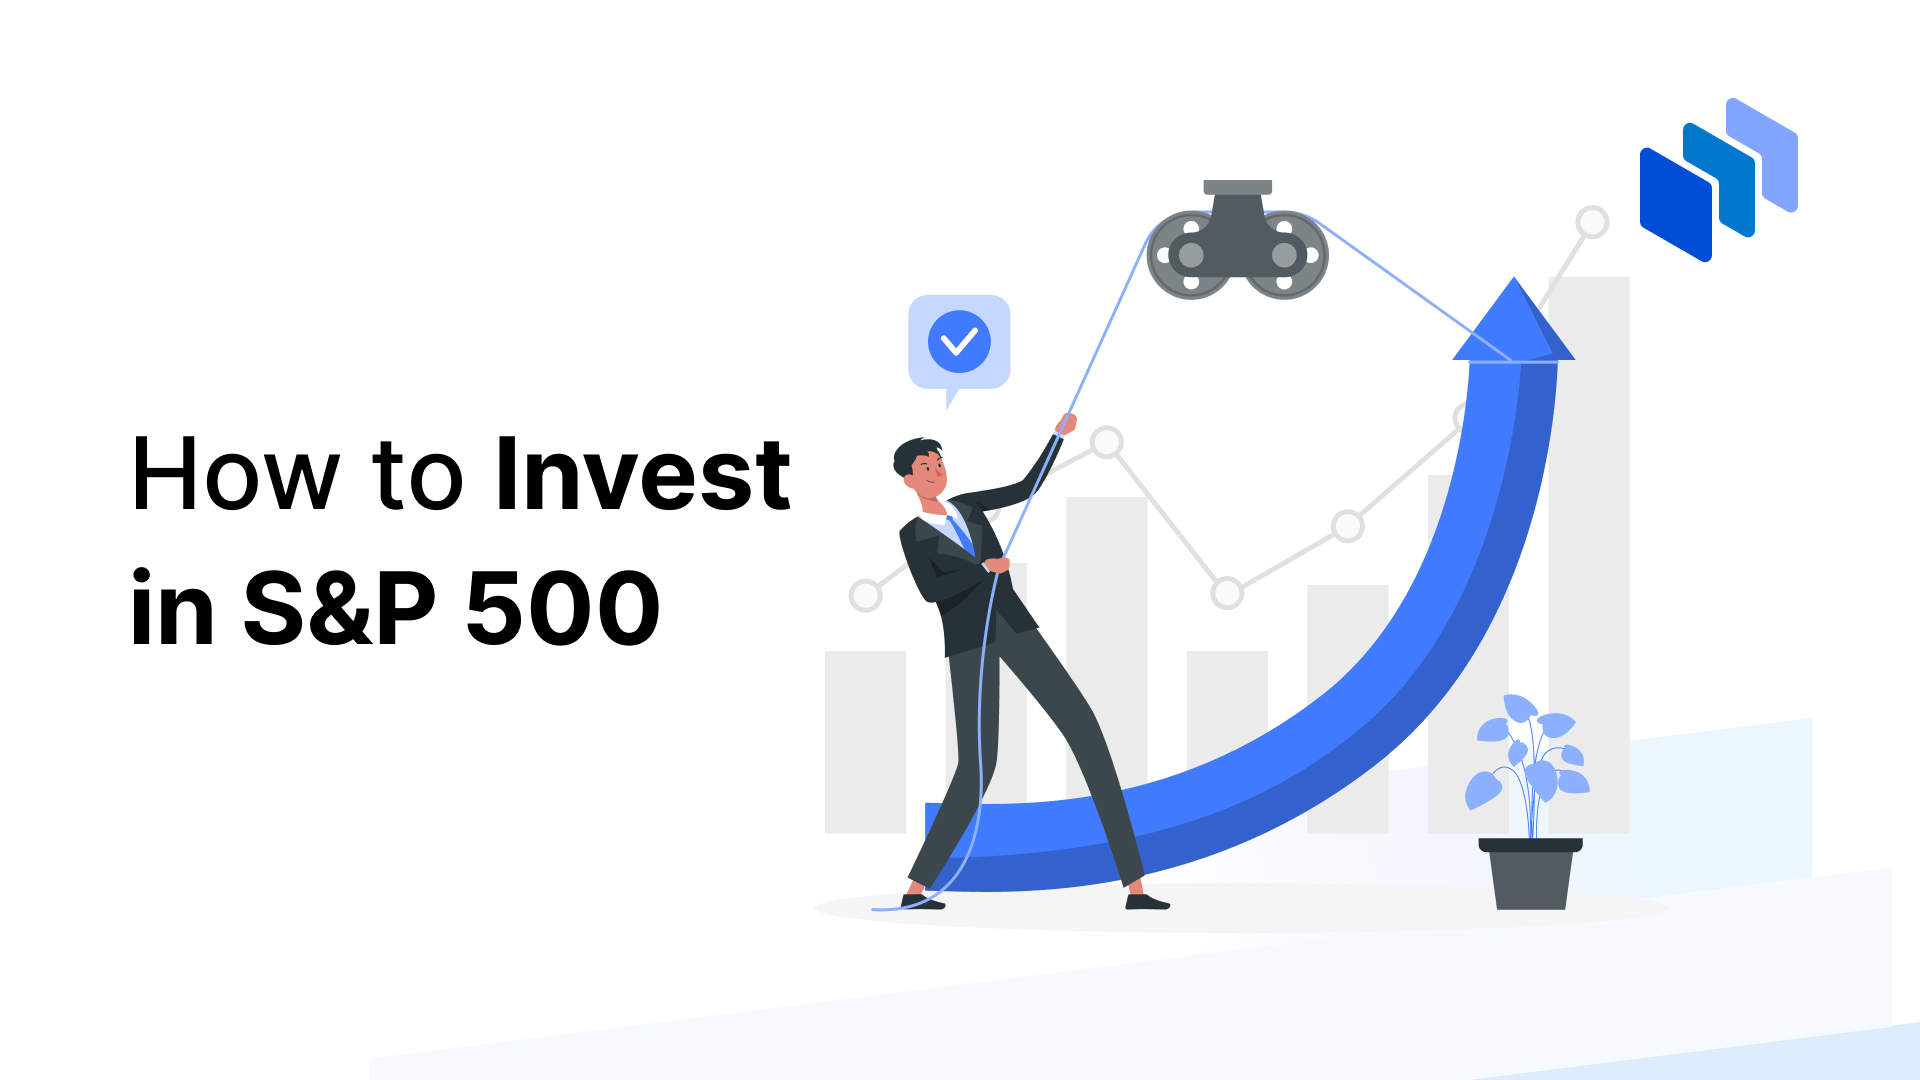 How to Invest in S&P 500